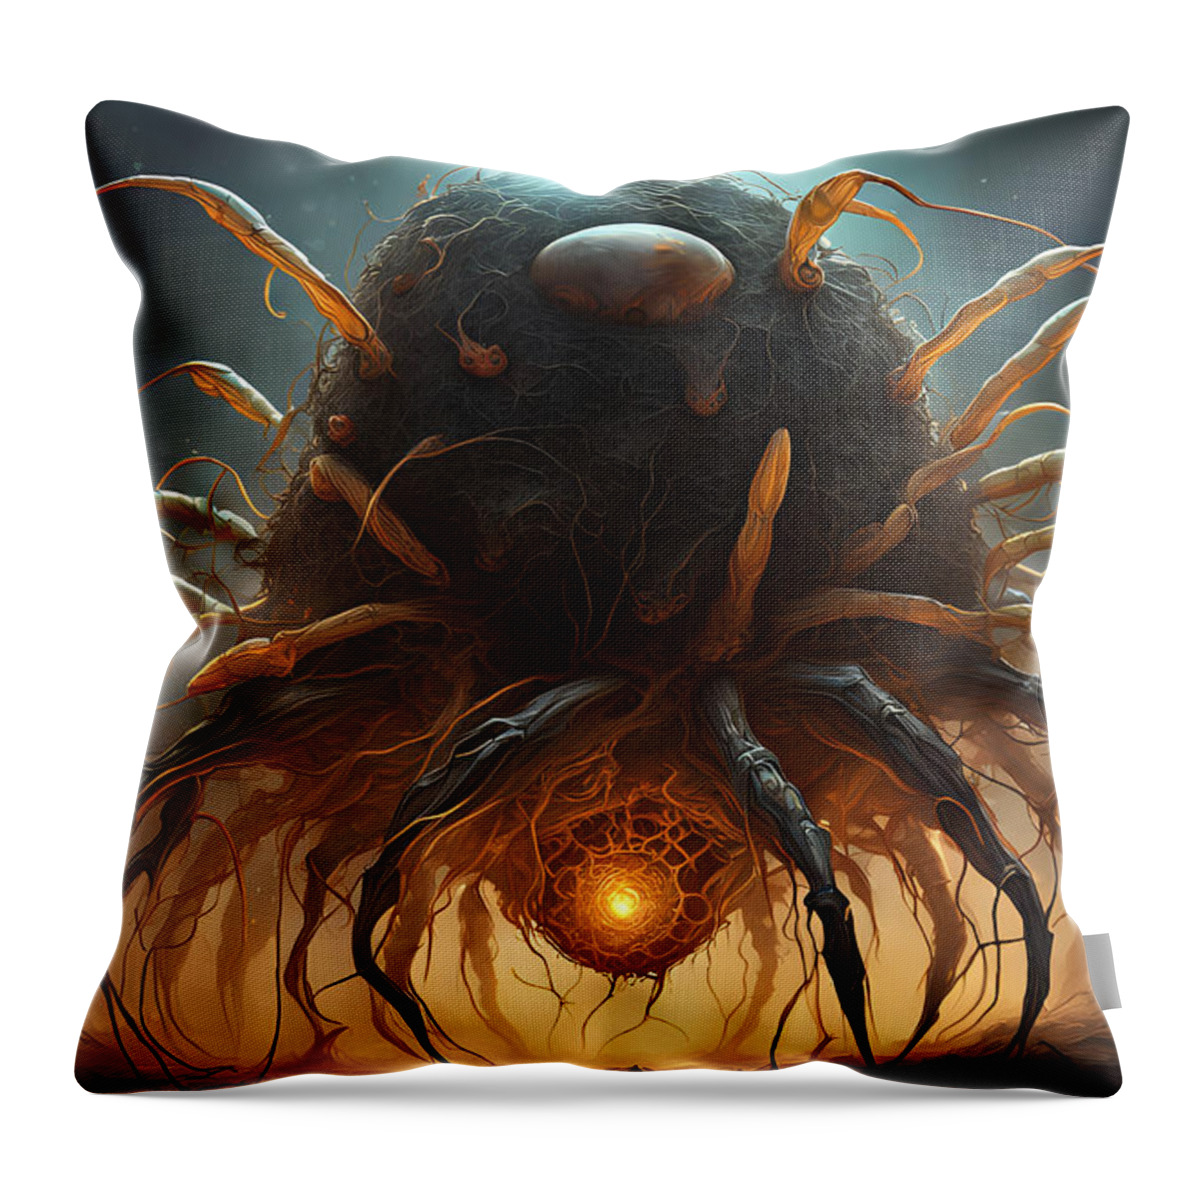 Weird Organic Insectoid Aliens Atmospheric Disturbing Throw Pillow featuring the digital art Bug Queen by Tricky Woo